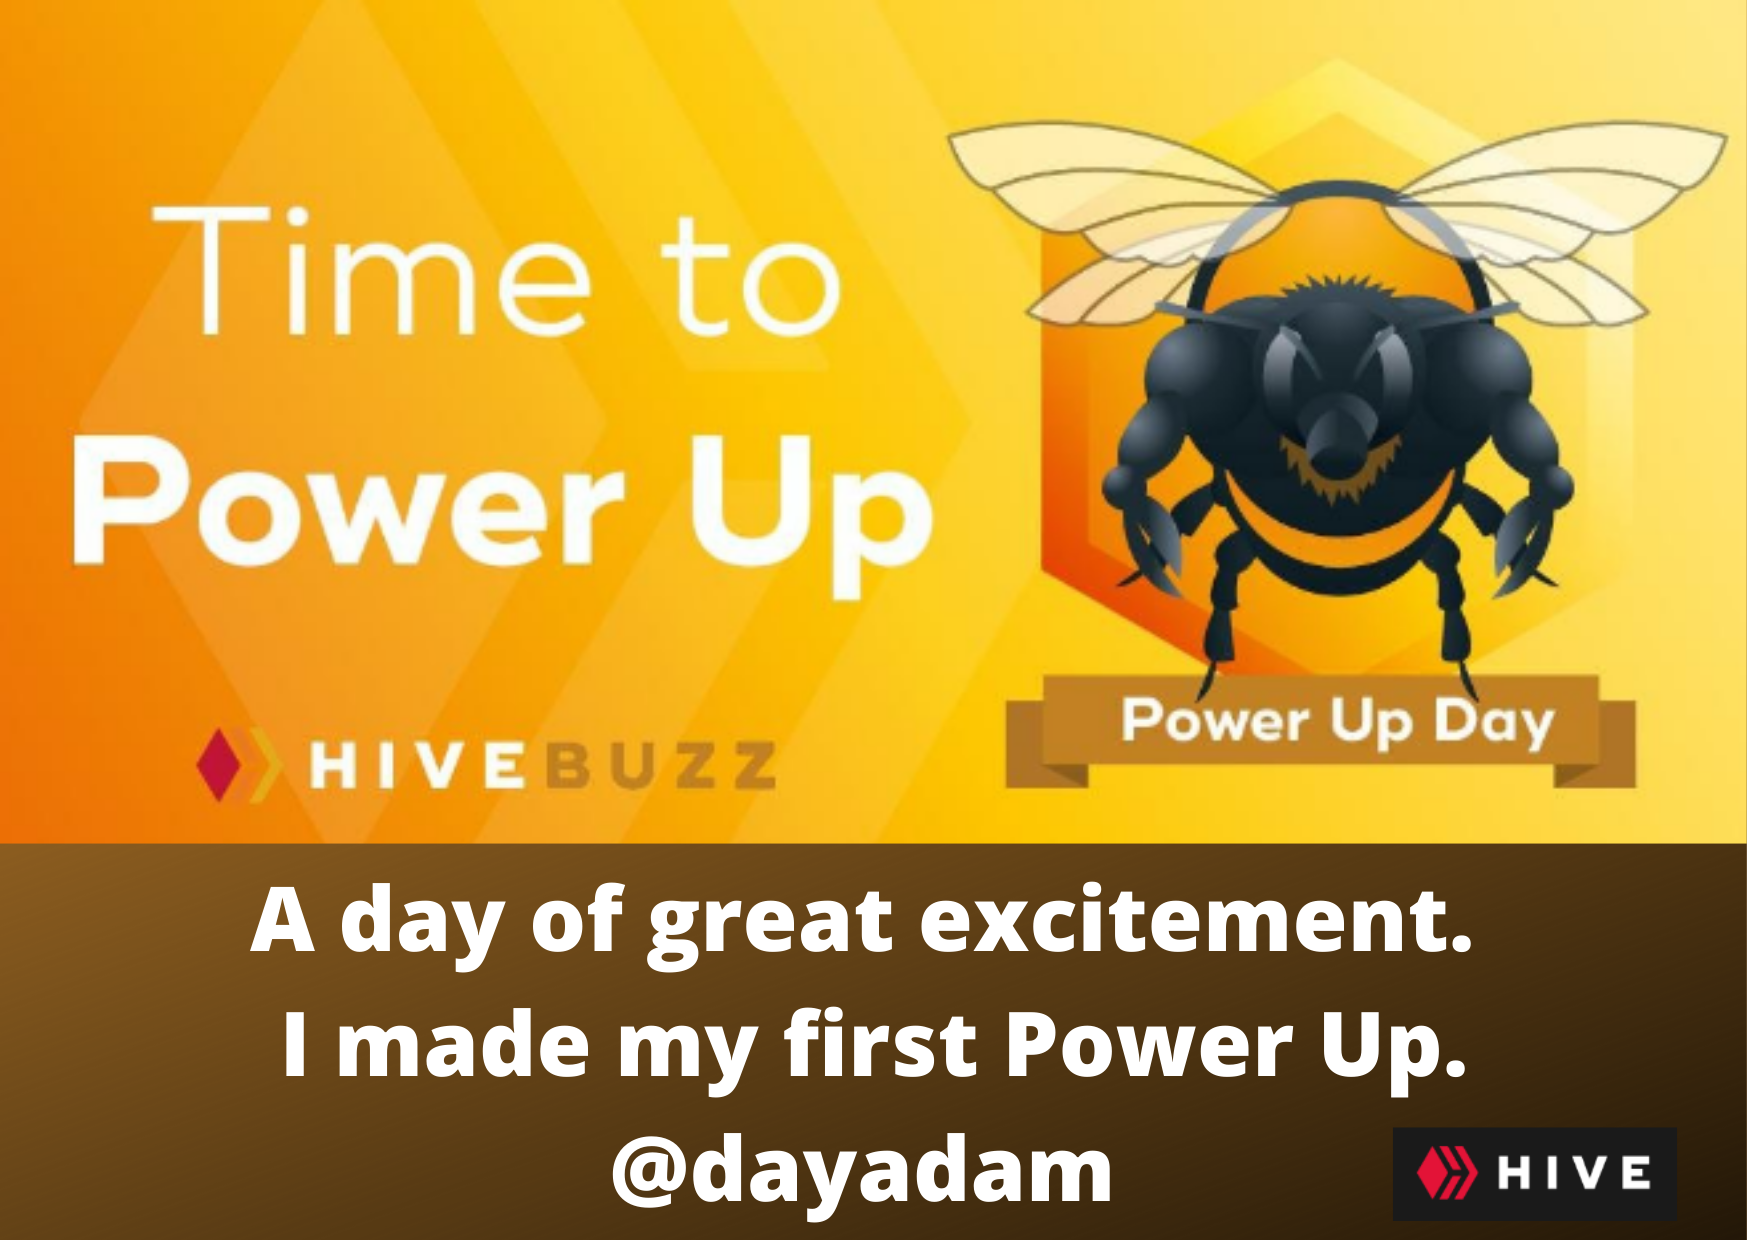 @dayadam/dia-de-gran-emocion-hice-mi-primer-power-up-a-day-of-great-excitement-i-made-my-first-power-up